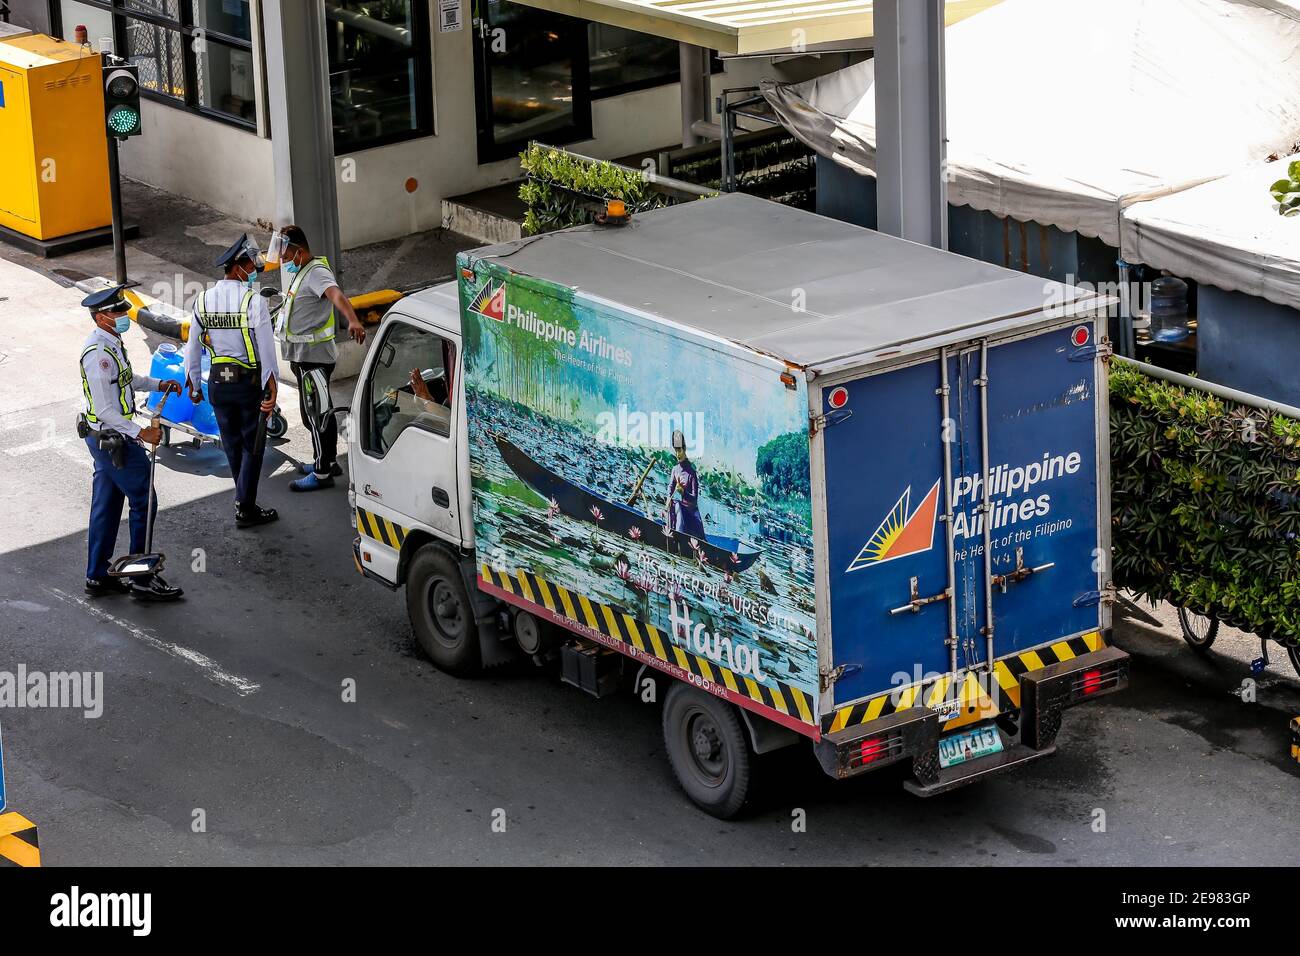 Manila, Philippines. 3rd Feb, 2021. A truck of the Philippine Airlines (PAL) is seen at the Manila Ninoy Aquino International Airport (NAIA) terminal 1 in Paranaque City, the Philippines, Feb. 3, 2021. The PAL is going to let go of 2,300 employees in mid-March, as part of its recovery initiative amid losses due to the pandemic, the company announced on Tuesday. The airline said the affected employees represent about 30 percent of its workforce and that the total includes voluntary separations and involuntary retrenchment. Credit: Rouelle Umali/Xinhua/Alamy Live News Stock Photo